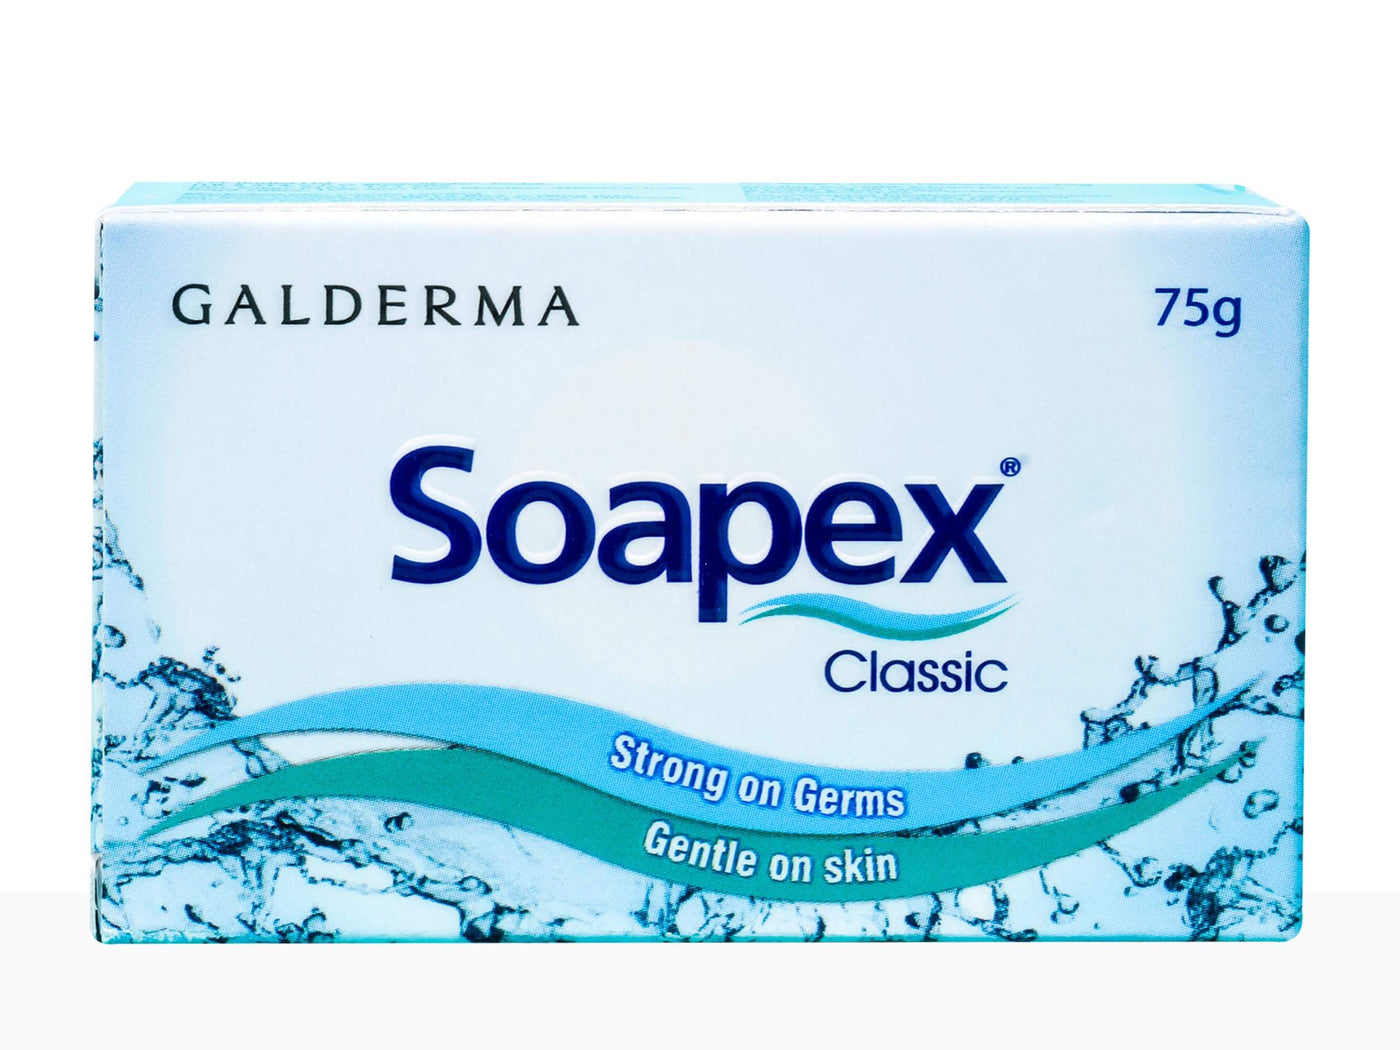 Soapex classic soap(strong on germs,gentle on skin) - Clinikally